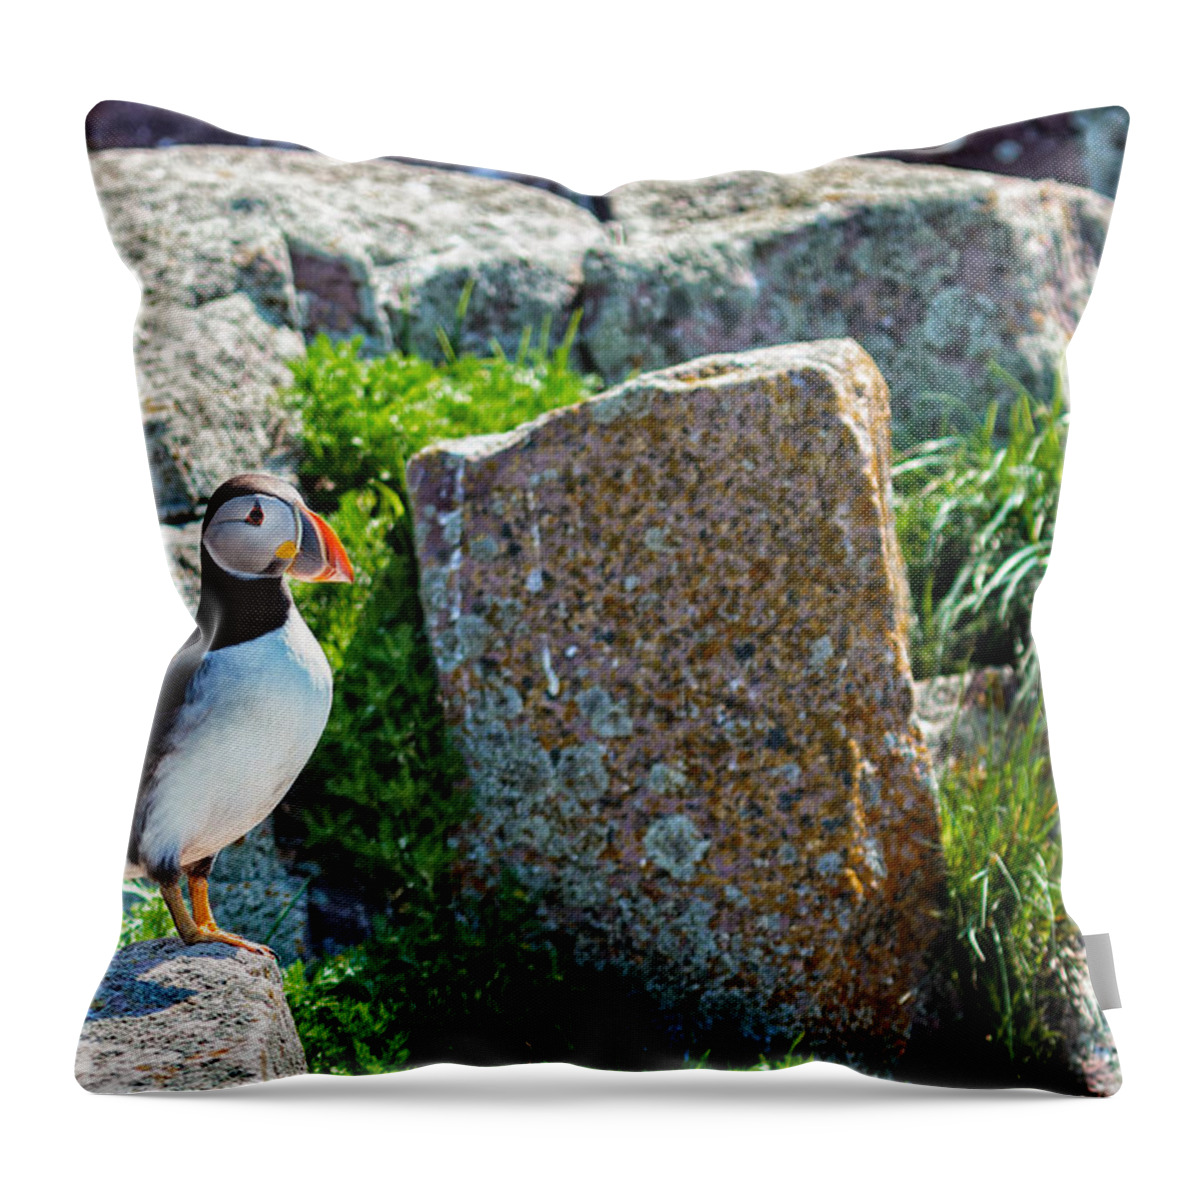 Atlantic Puffin Throw Pillow featuring the photograph Atlantic Puffin Close Up by Perla Copernik